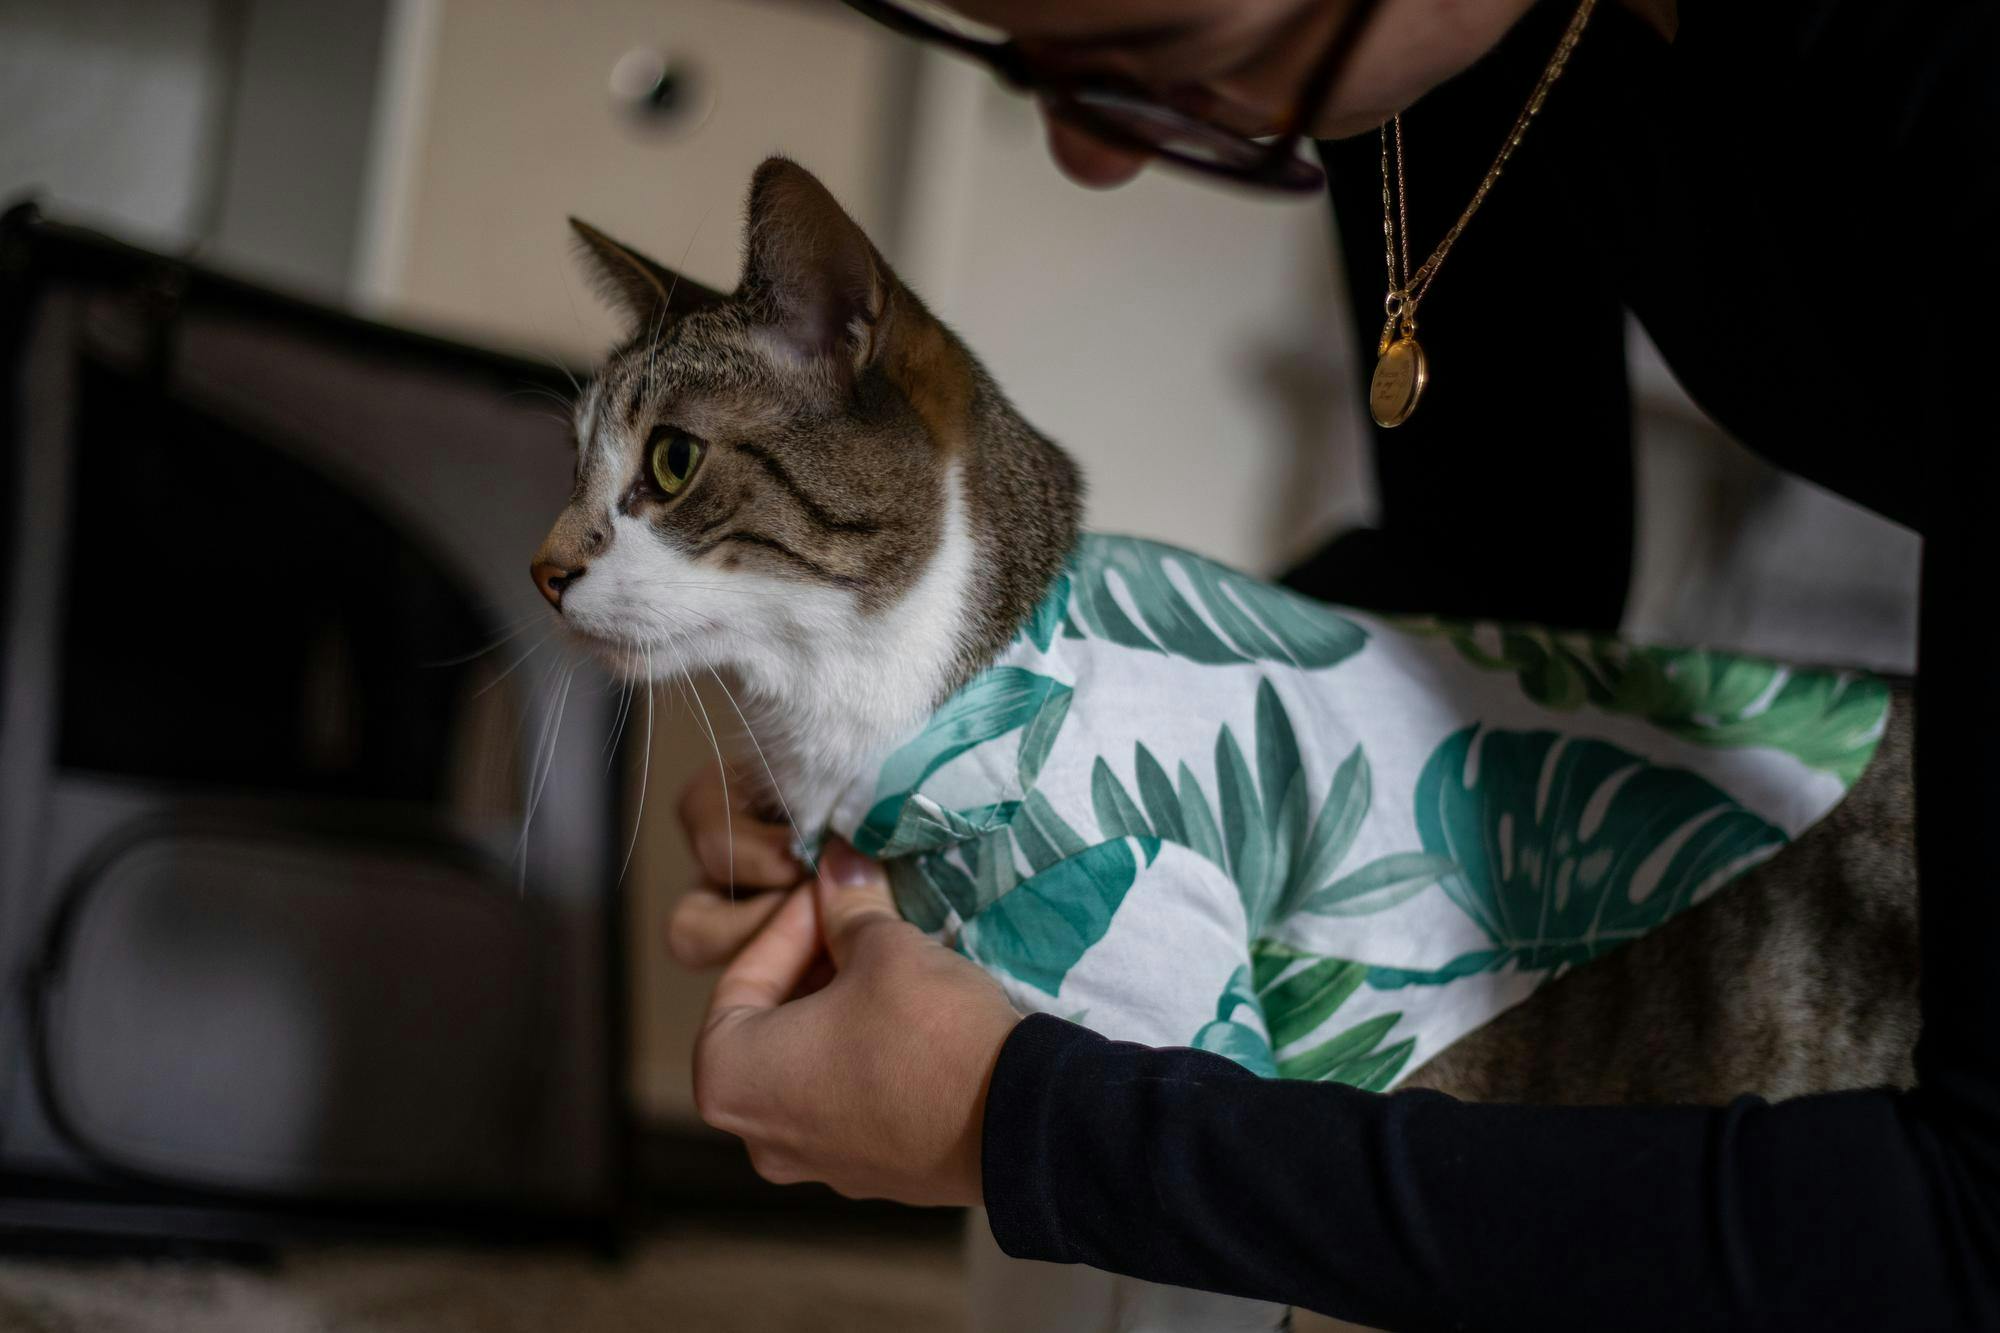 Fifth-year Alice Finlan dresses her cat, Birch, in a printed collared shirt.